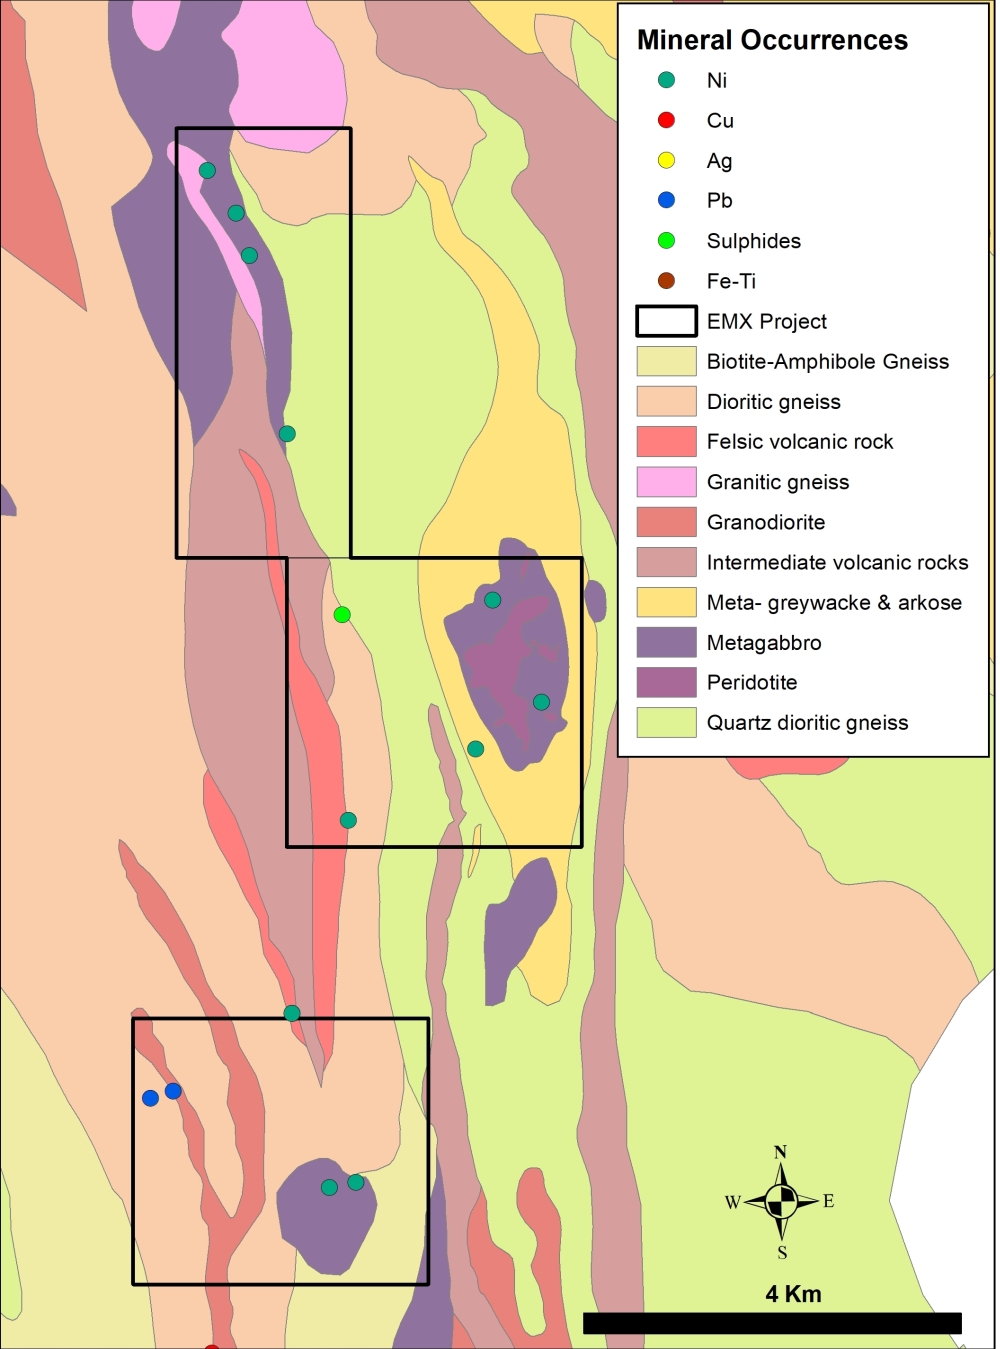 Ringerike/Ertelien project geology and minerals occurrences